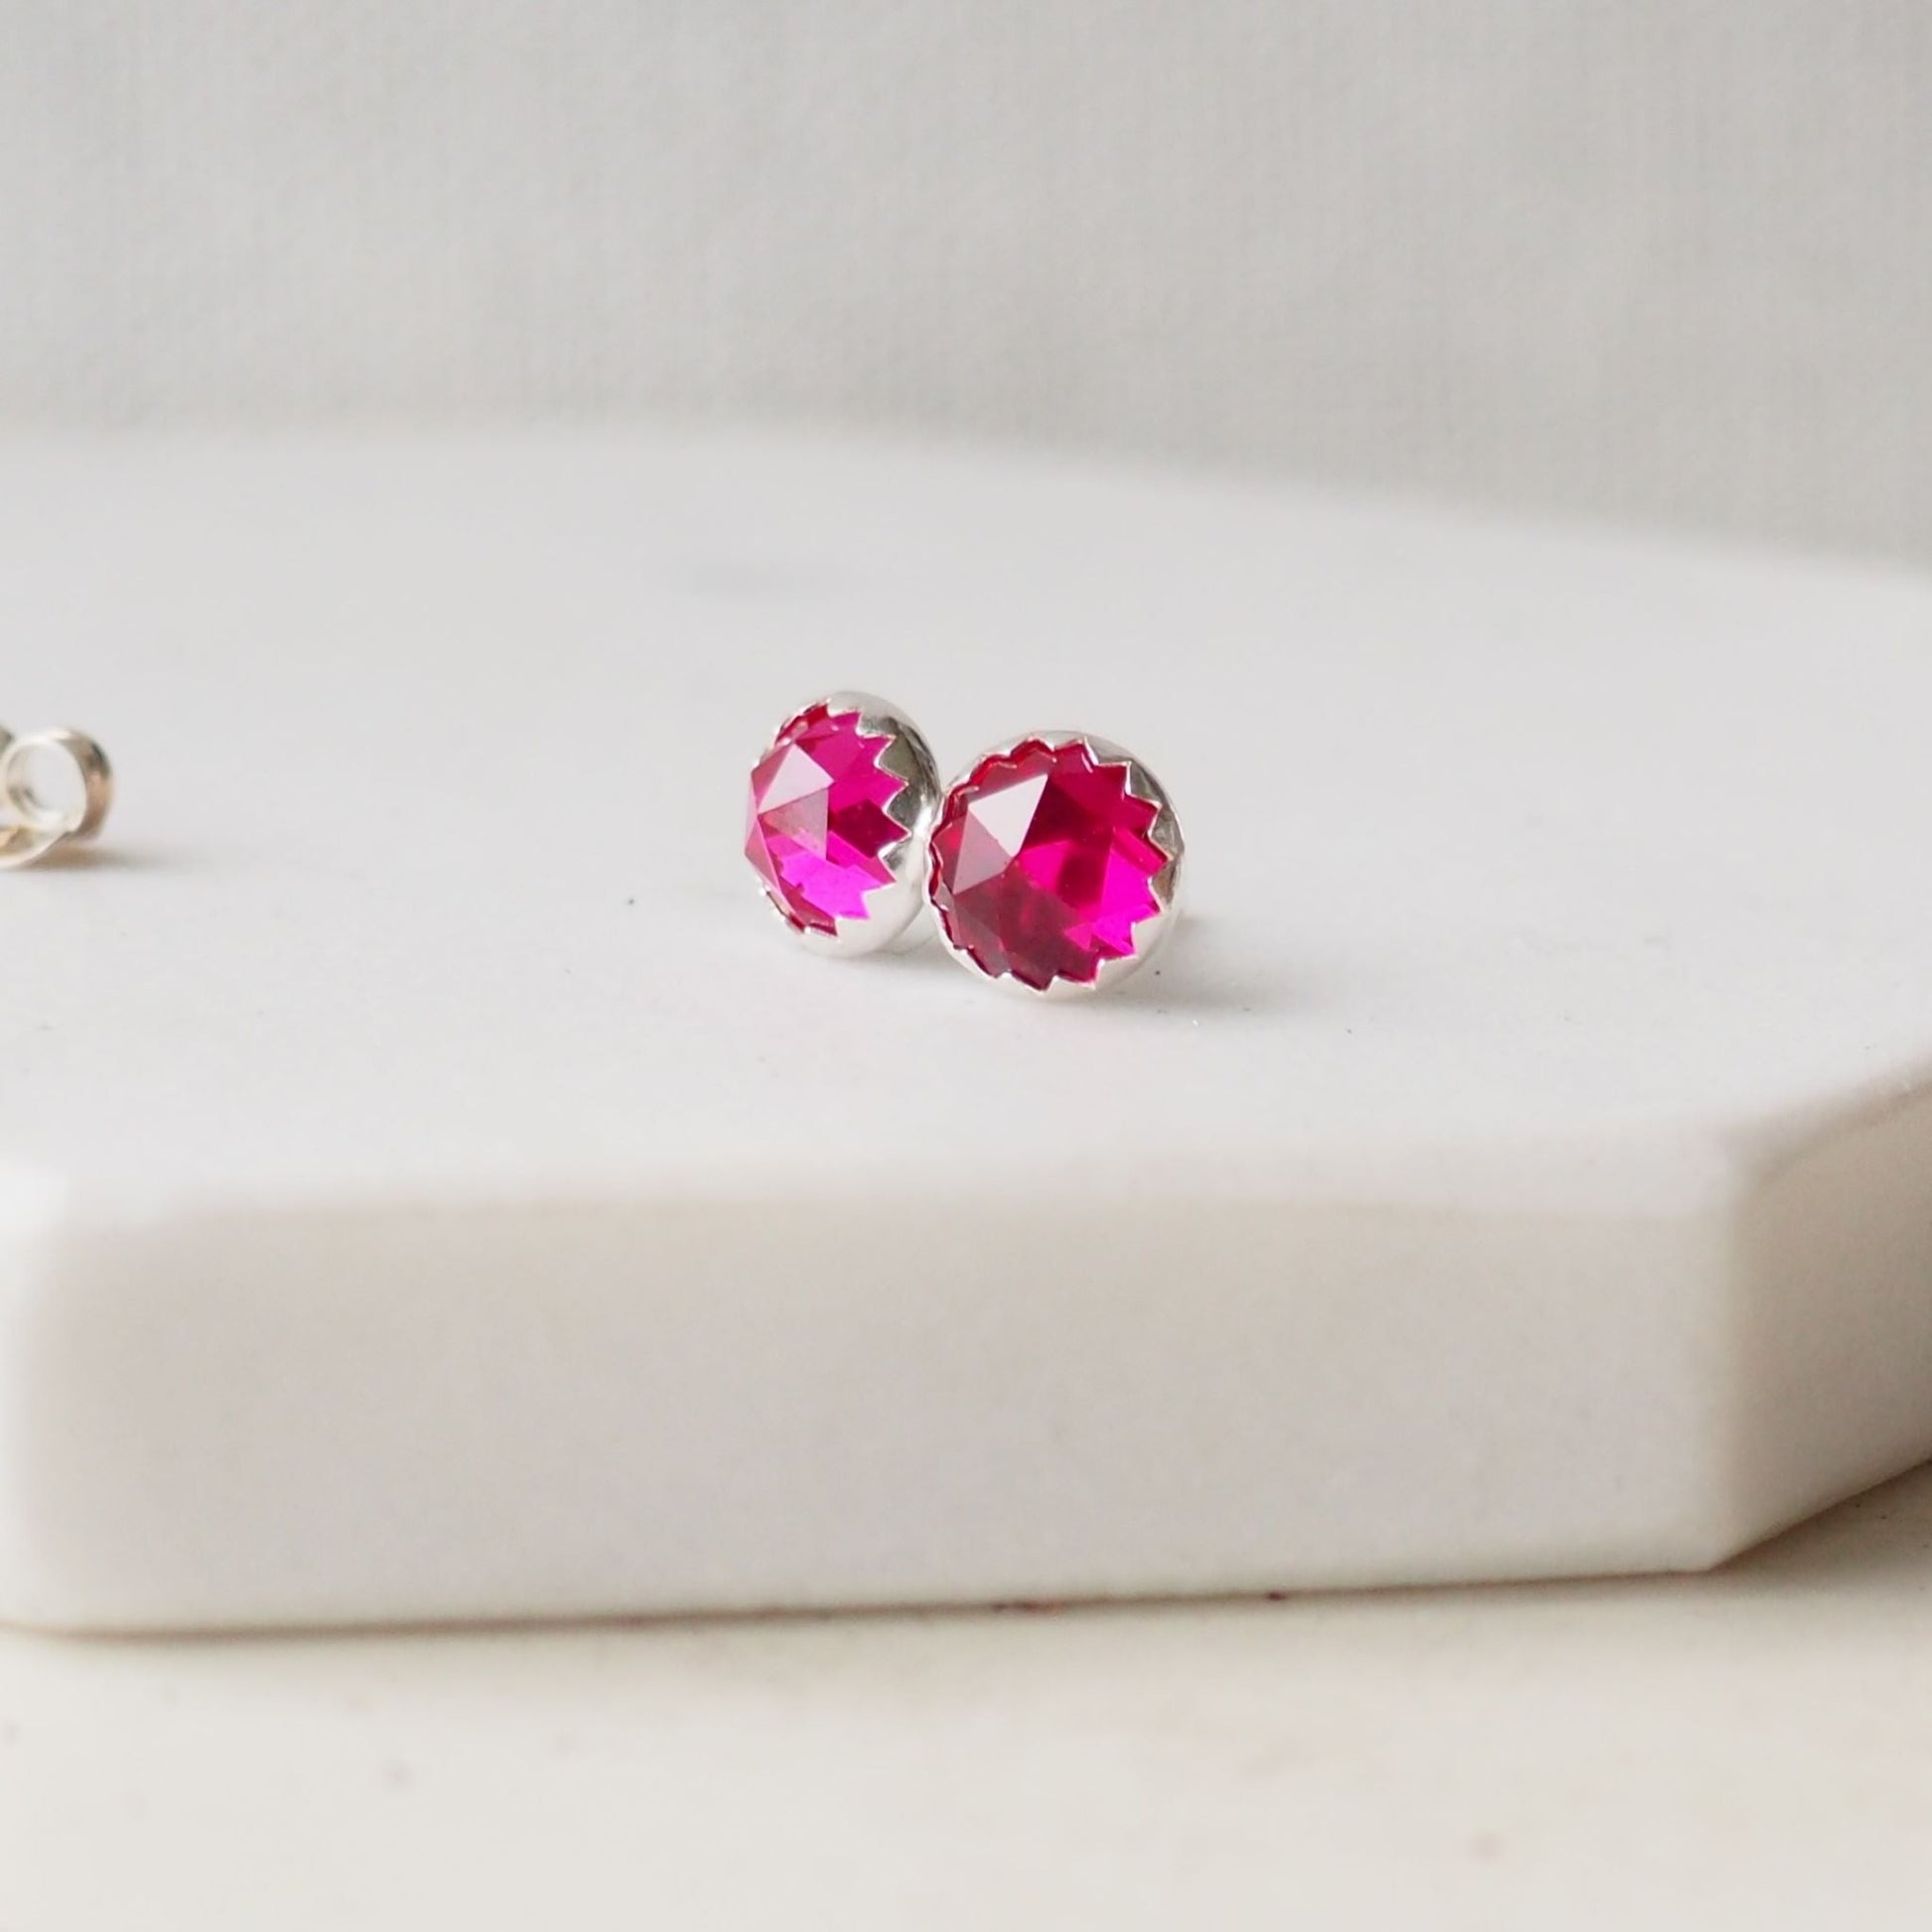 Lab Ruby Gemstone stud earrings with a bright hot pink artificial gemstone, round and faceted 6m in size. Set onto Sterling Silver settings. Birthstone for July Handmade in Scotland UK by maram jewellery